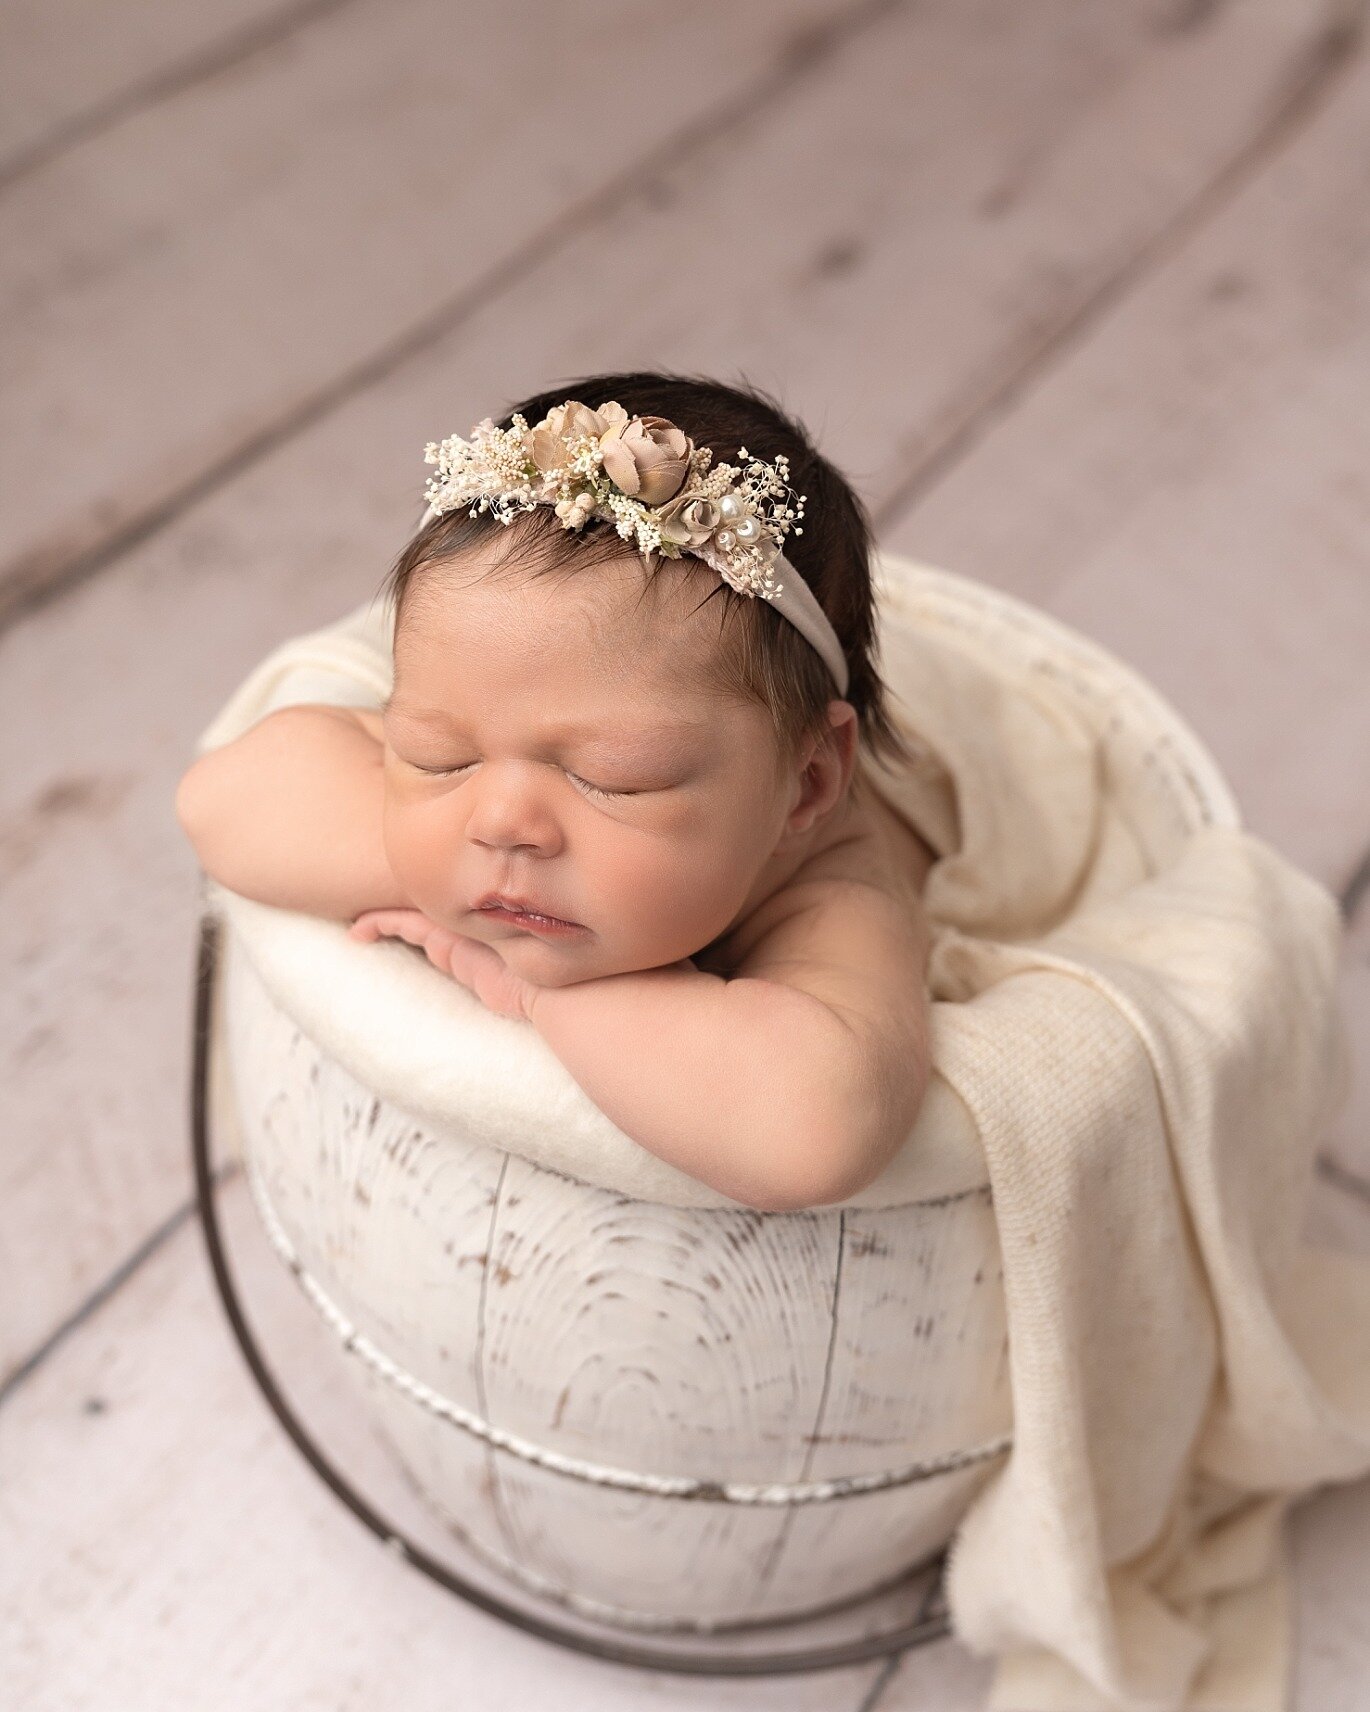 Book a newborn session and receive a FREE Maternity Mini session or Milestone Session! 
Link to book a session or see pricing: https://www.connerjamesphotography.com/booknow
#connerjamesphotography #referralprogram #supportsmallbusiness #edwardsville